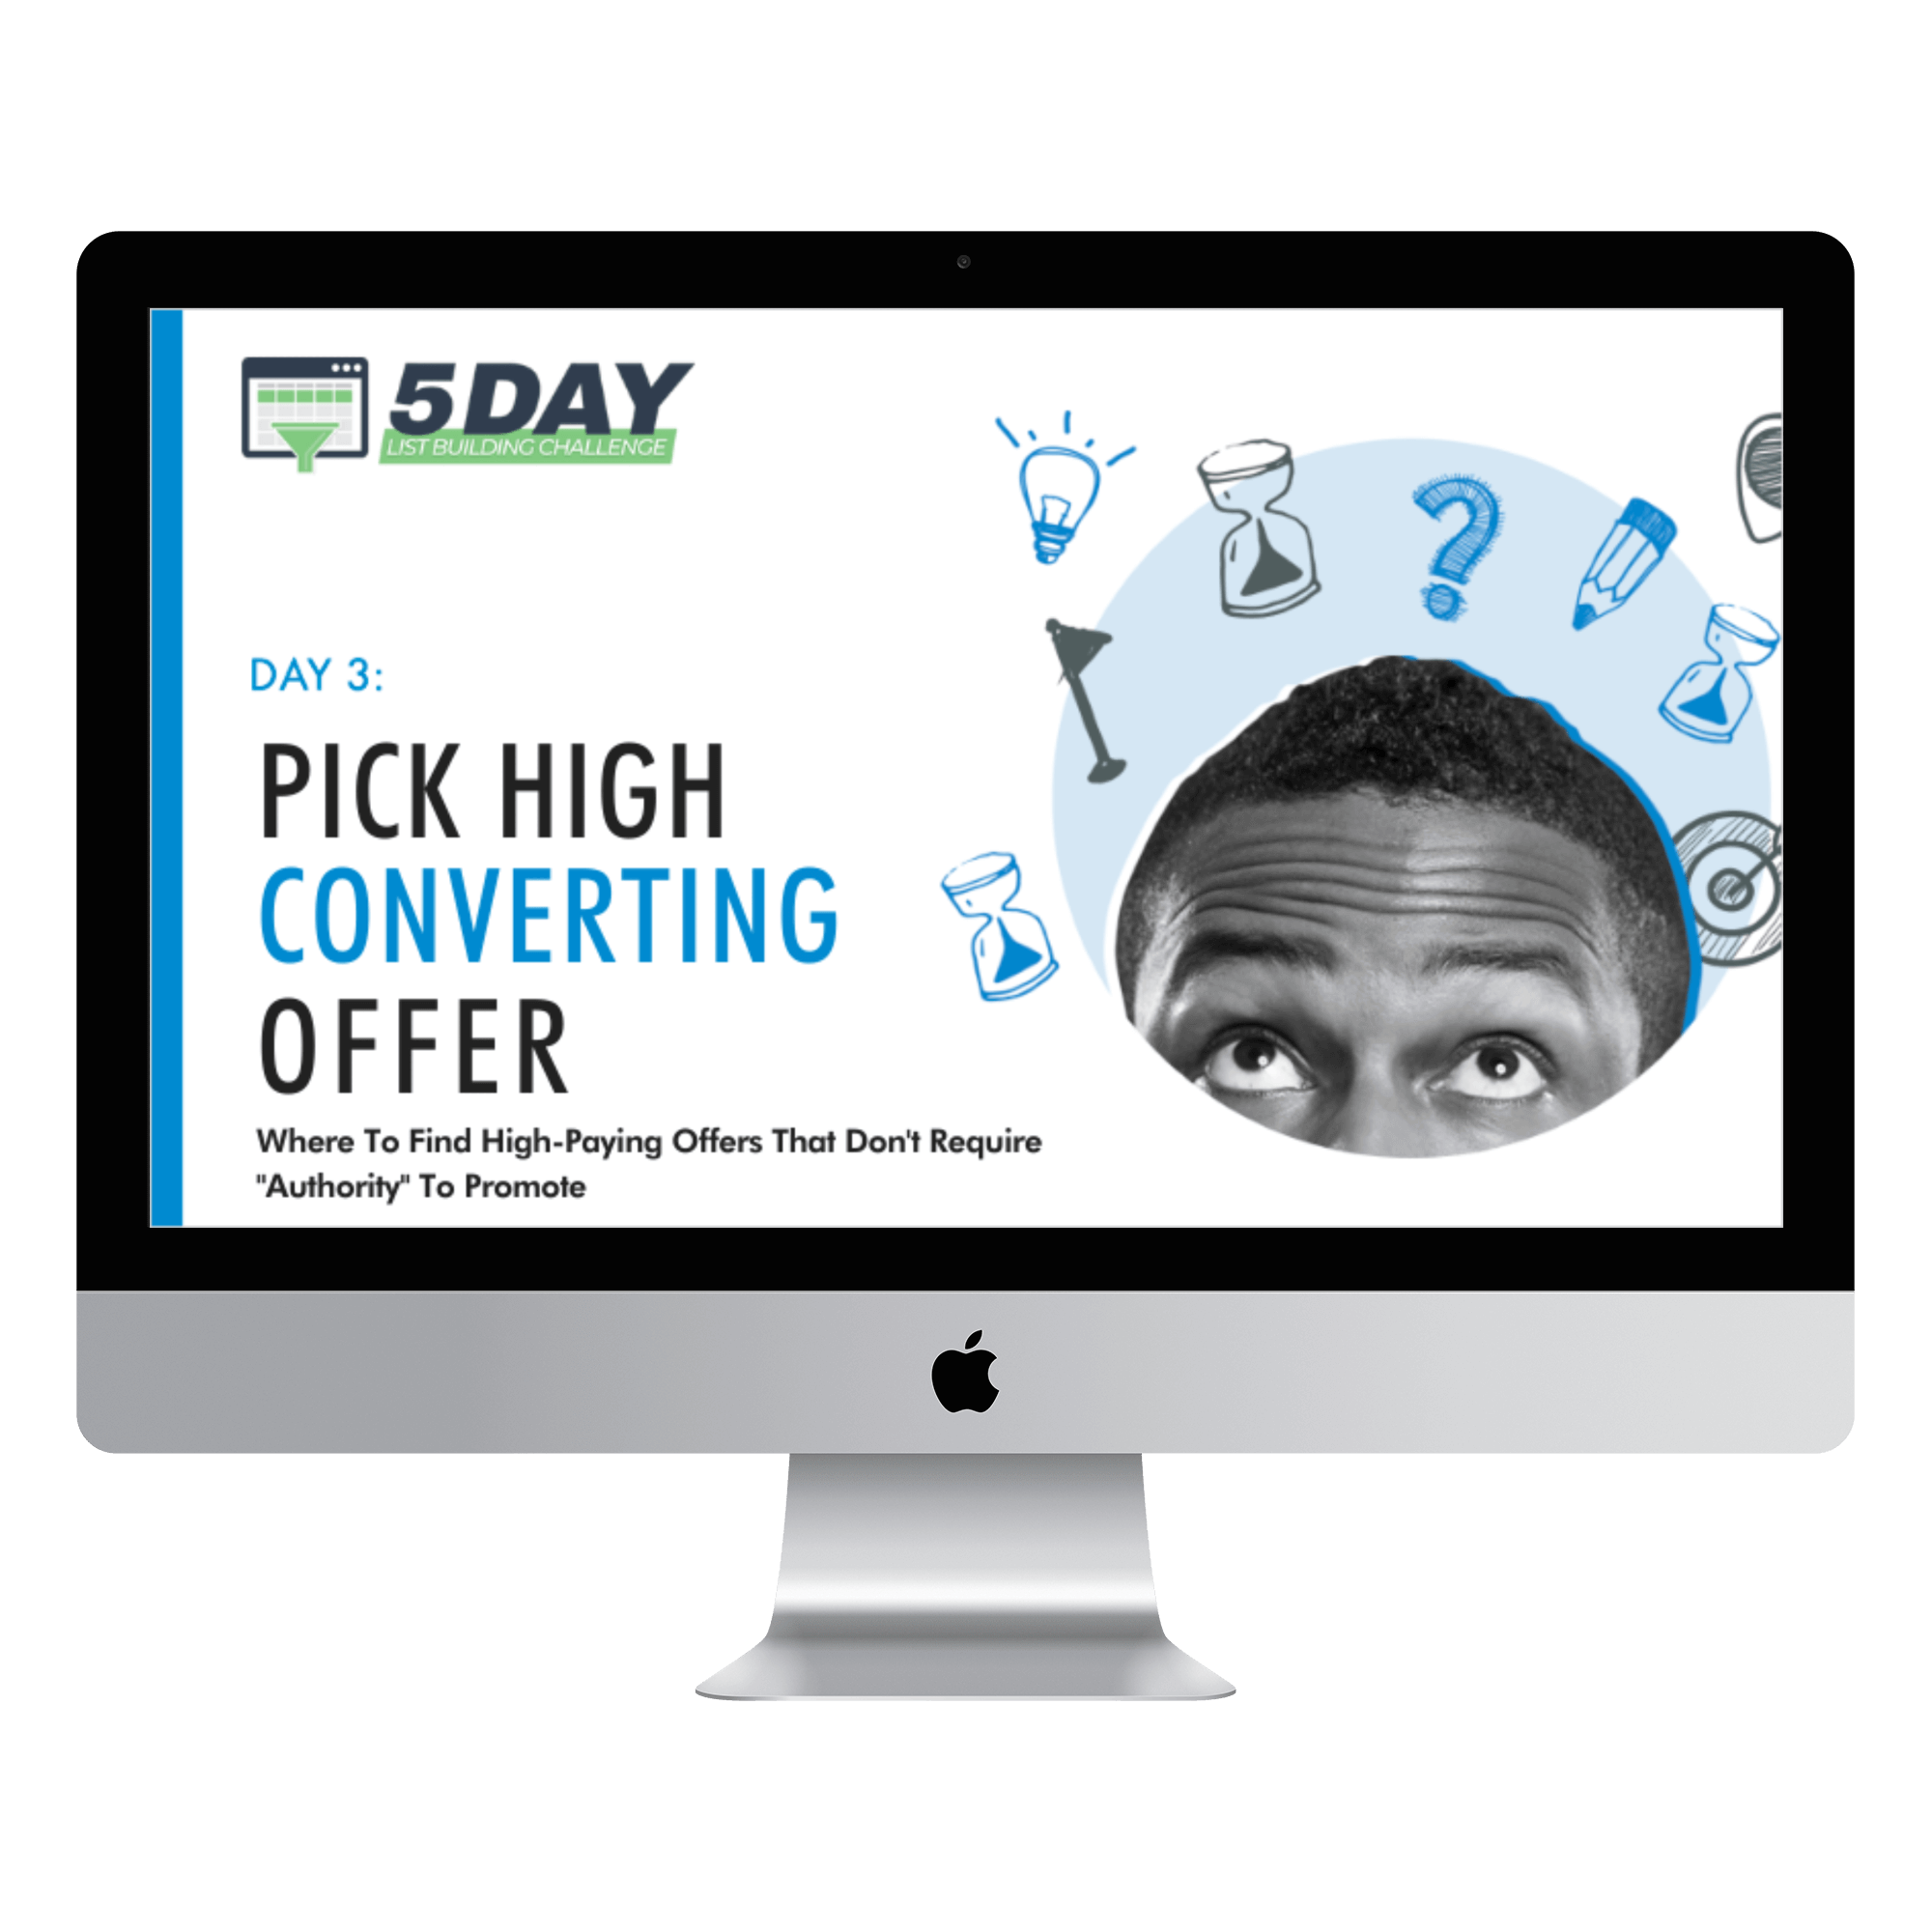 Day 3 - Pick High Converting Offer